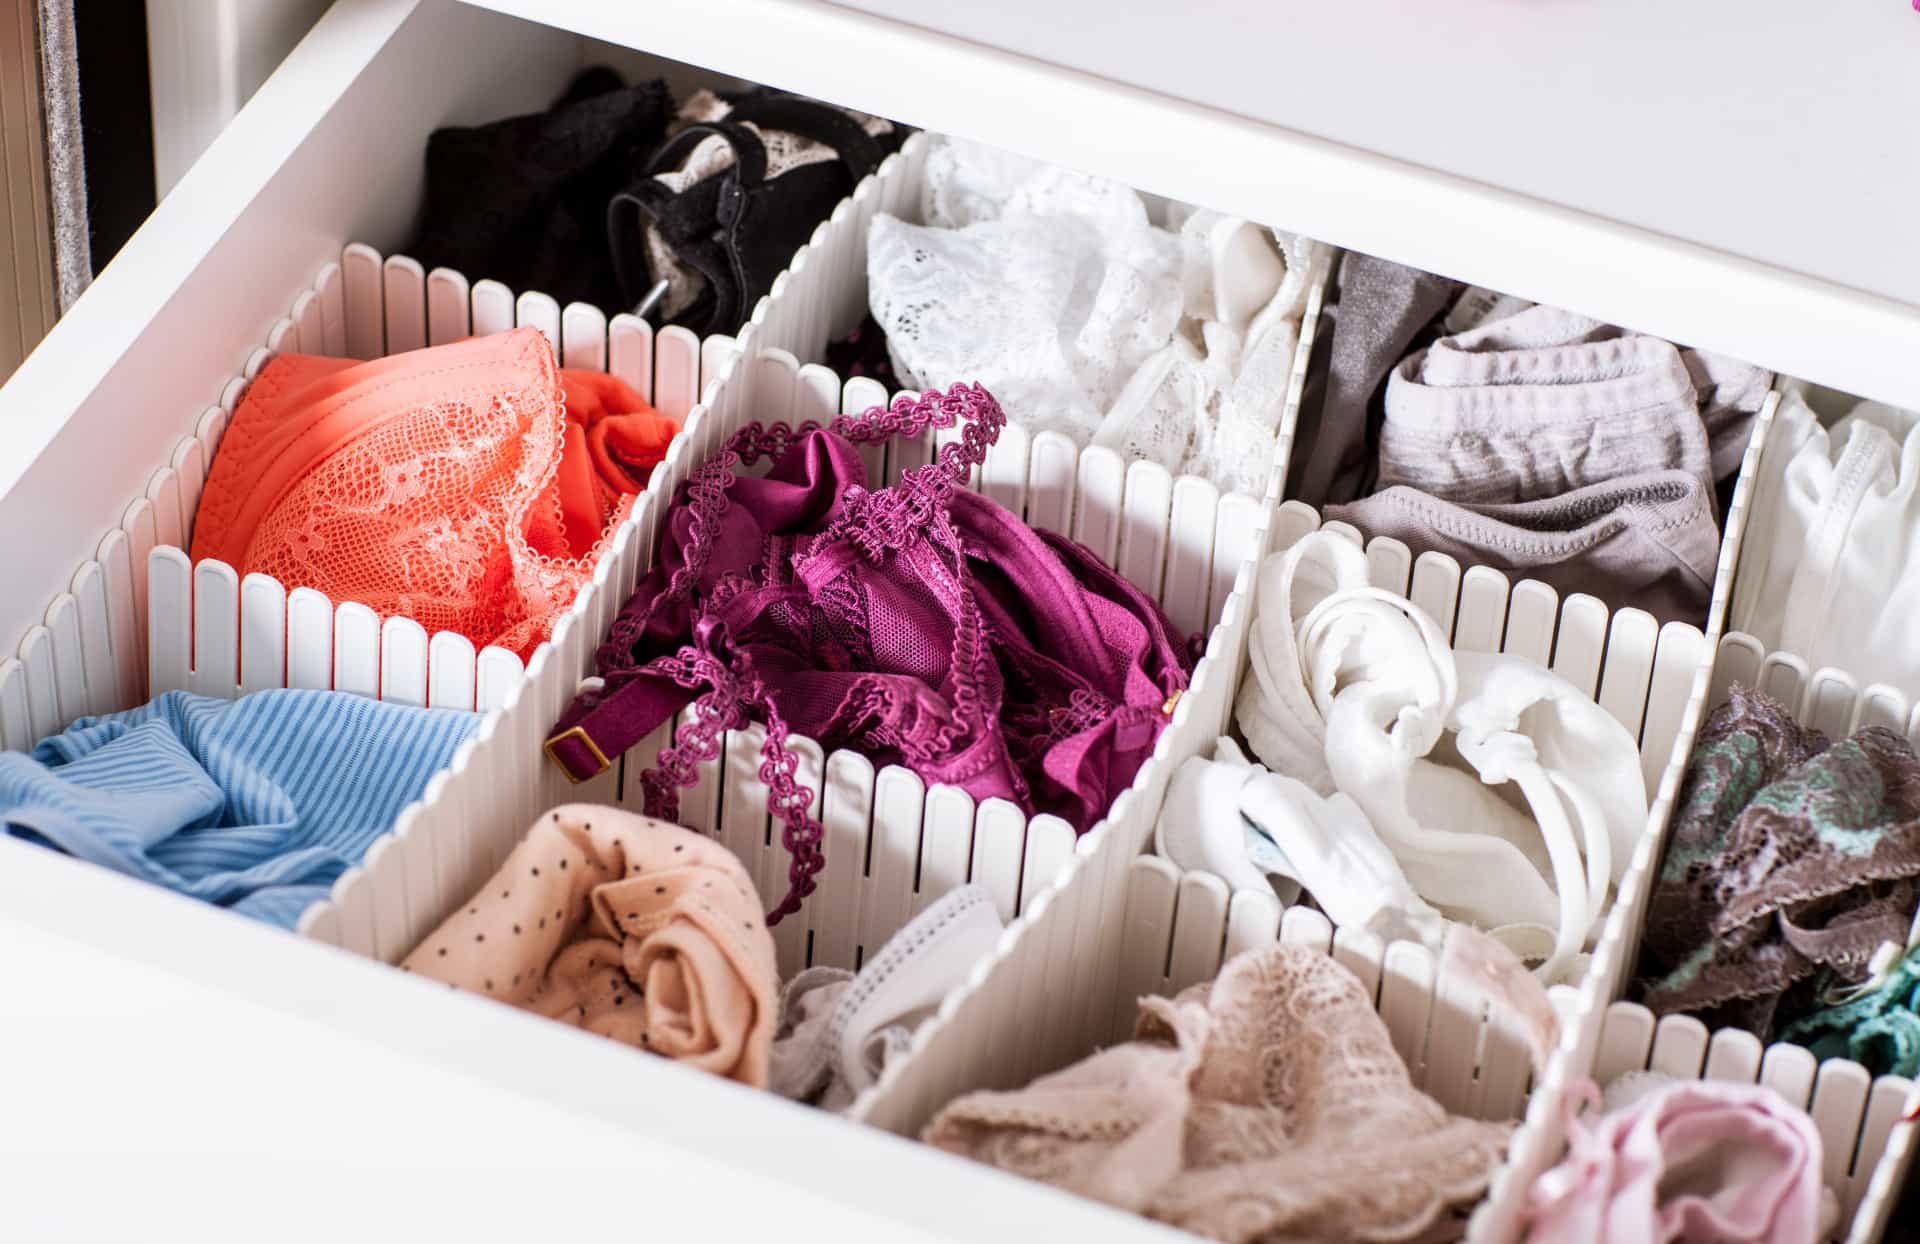 How to organize your wardrobe for cold weather